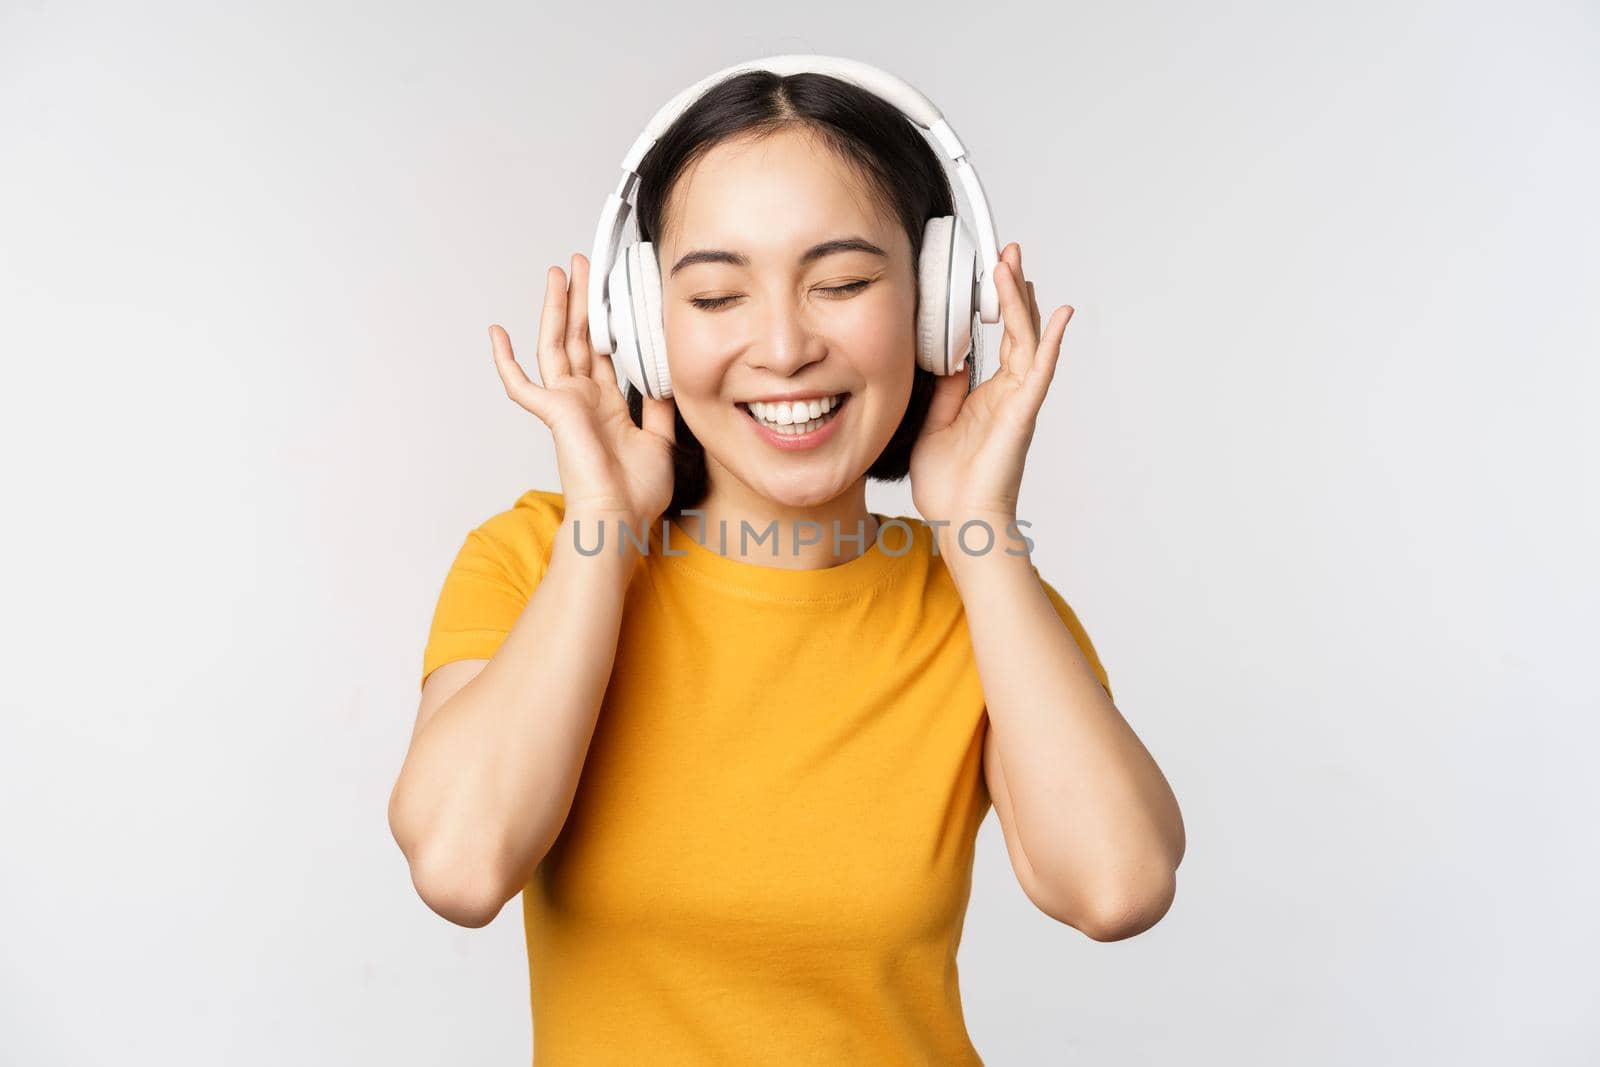 Happy asian girl dancing, listening music on headphones and smiling, standing in yellow tshirt against white background. Copy space